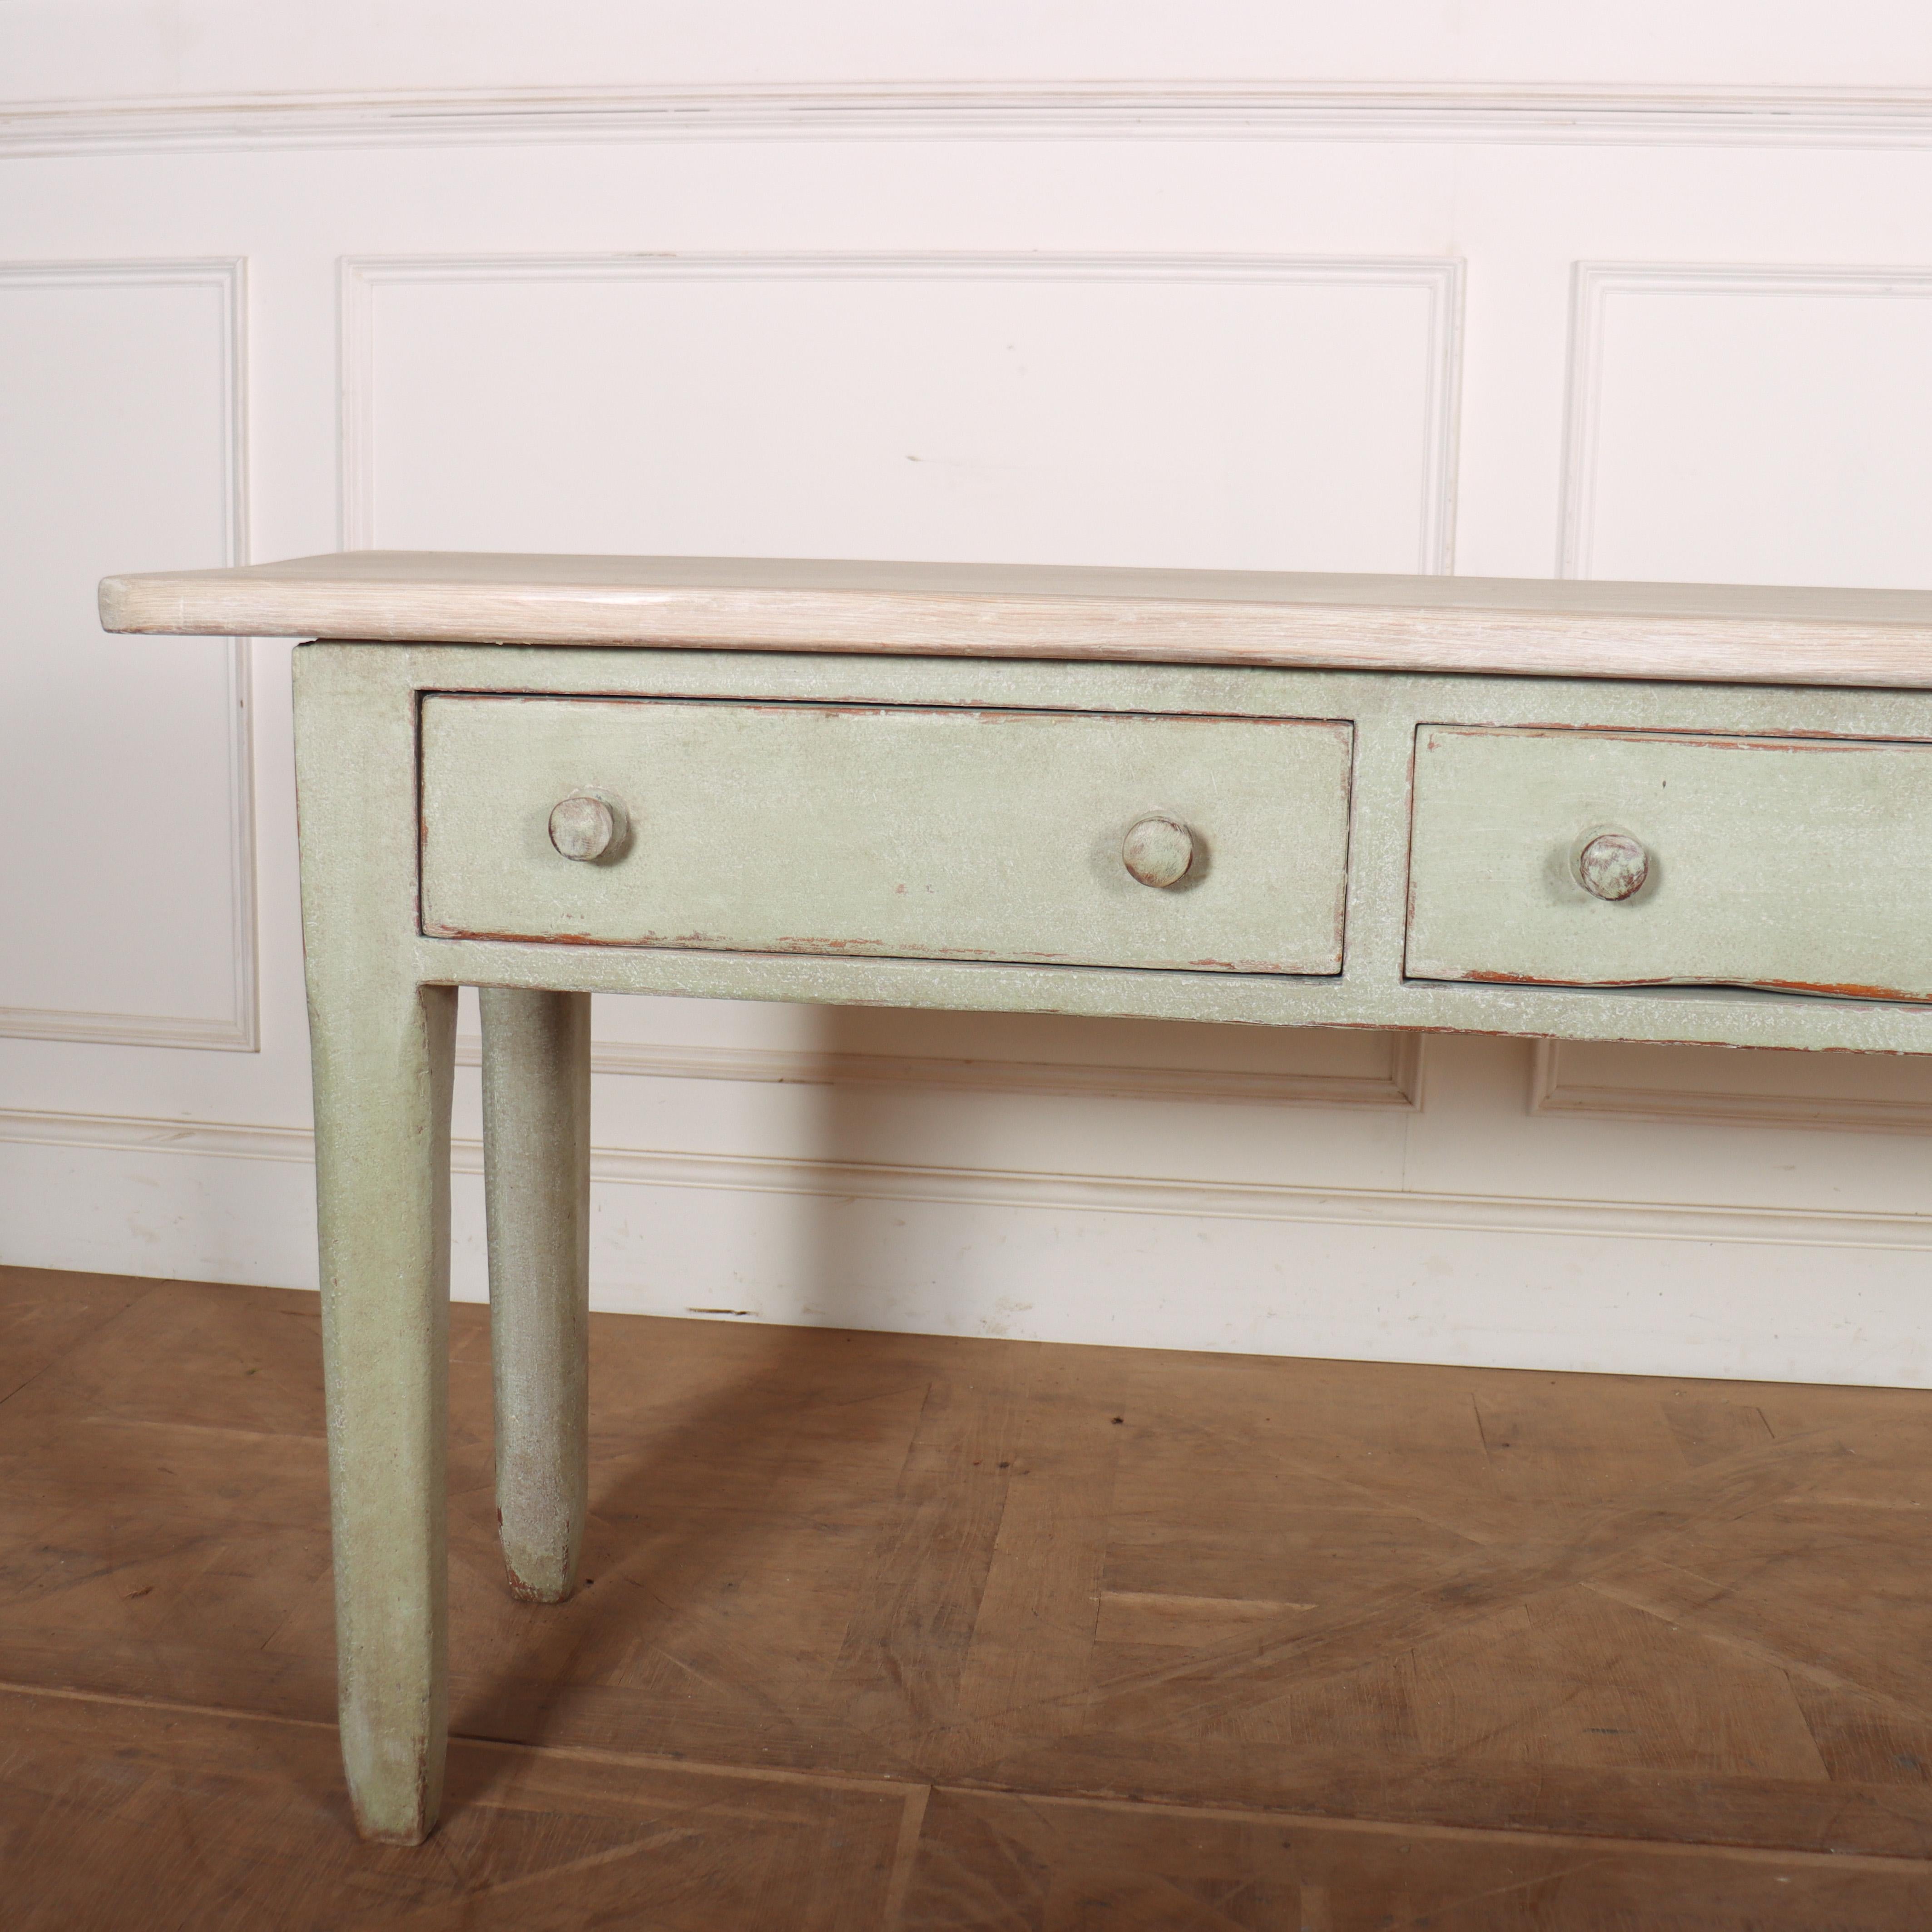 Narrow 19th C English painted pine 3 drawer console / serving table. 1880.

Reference: 8346

Dimensions
78 inches (198 cms) Wide
18 inches (46 cms) Deep
31 inches (79 cms) High